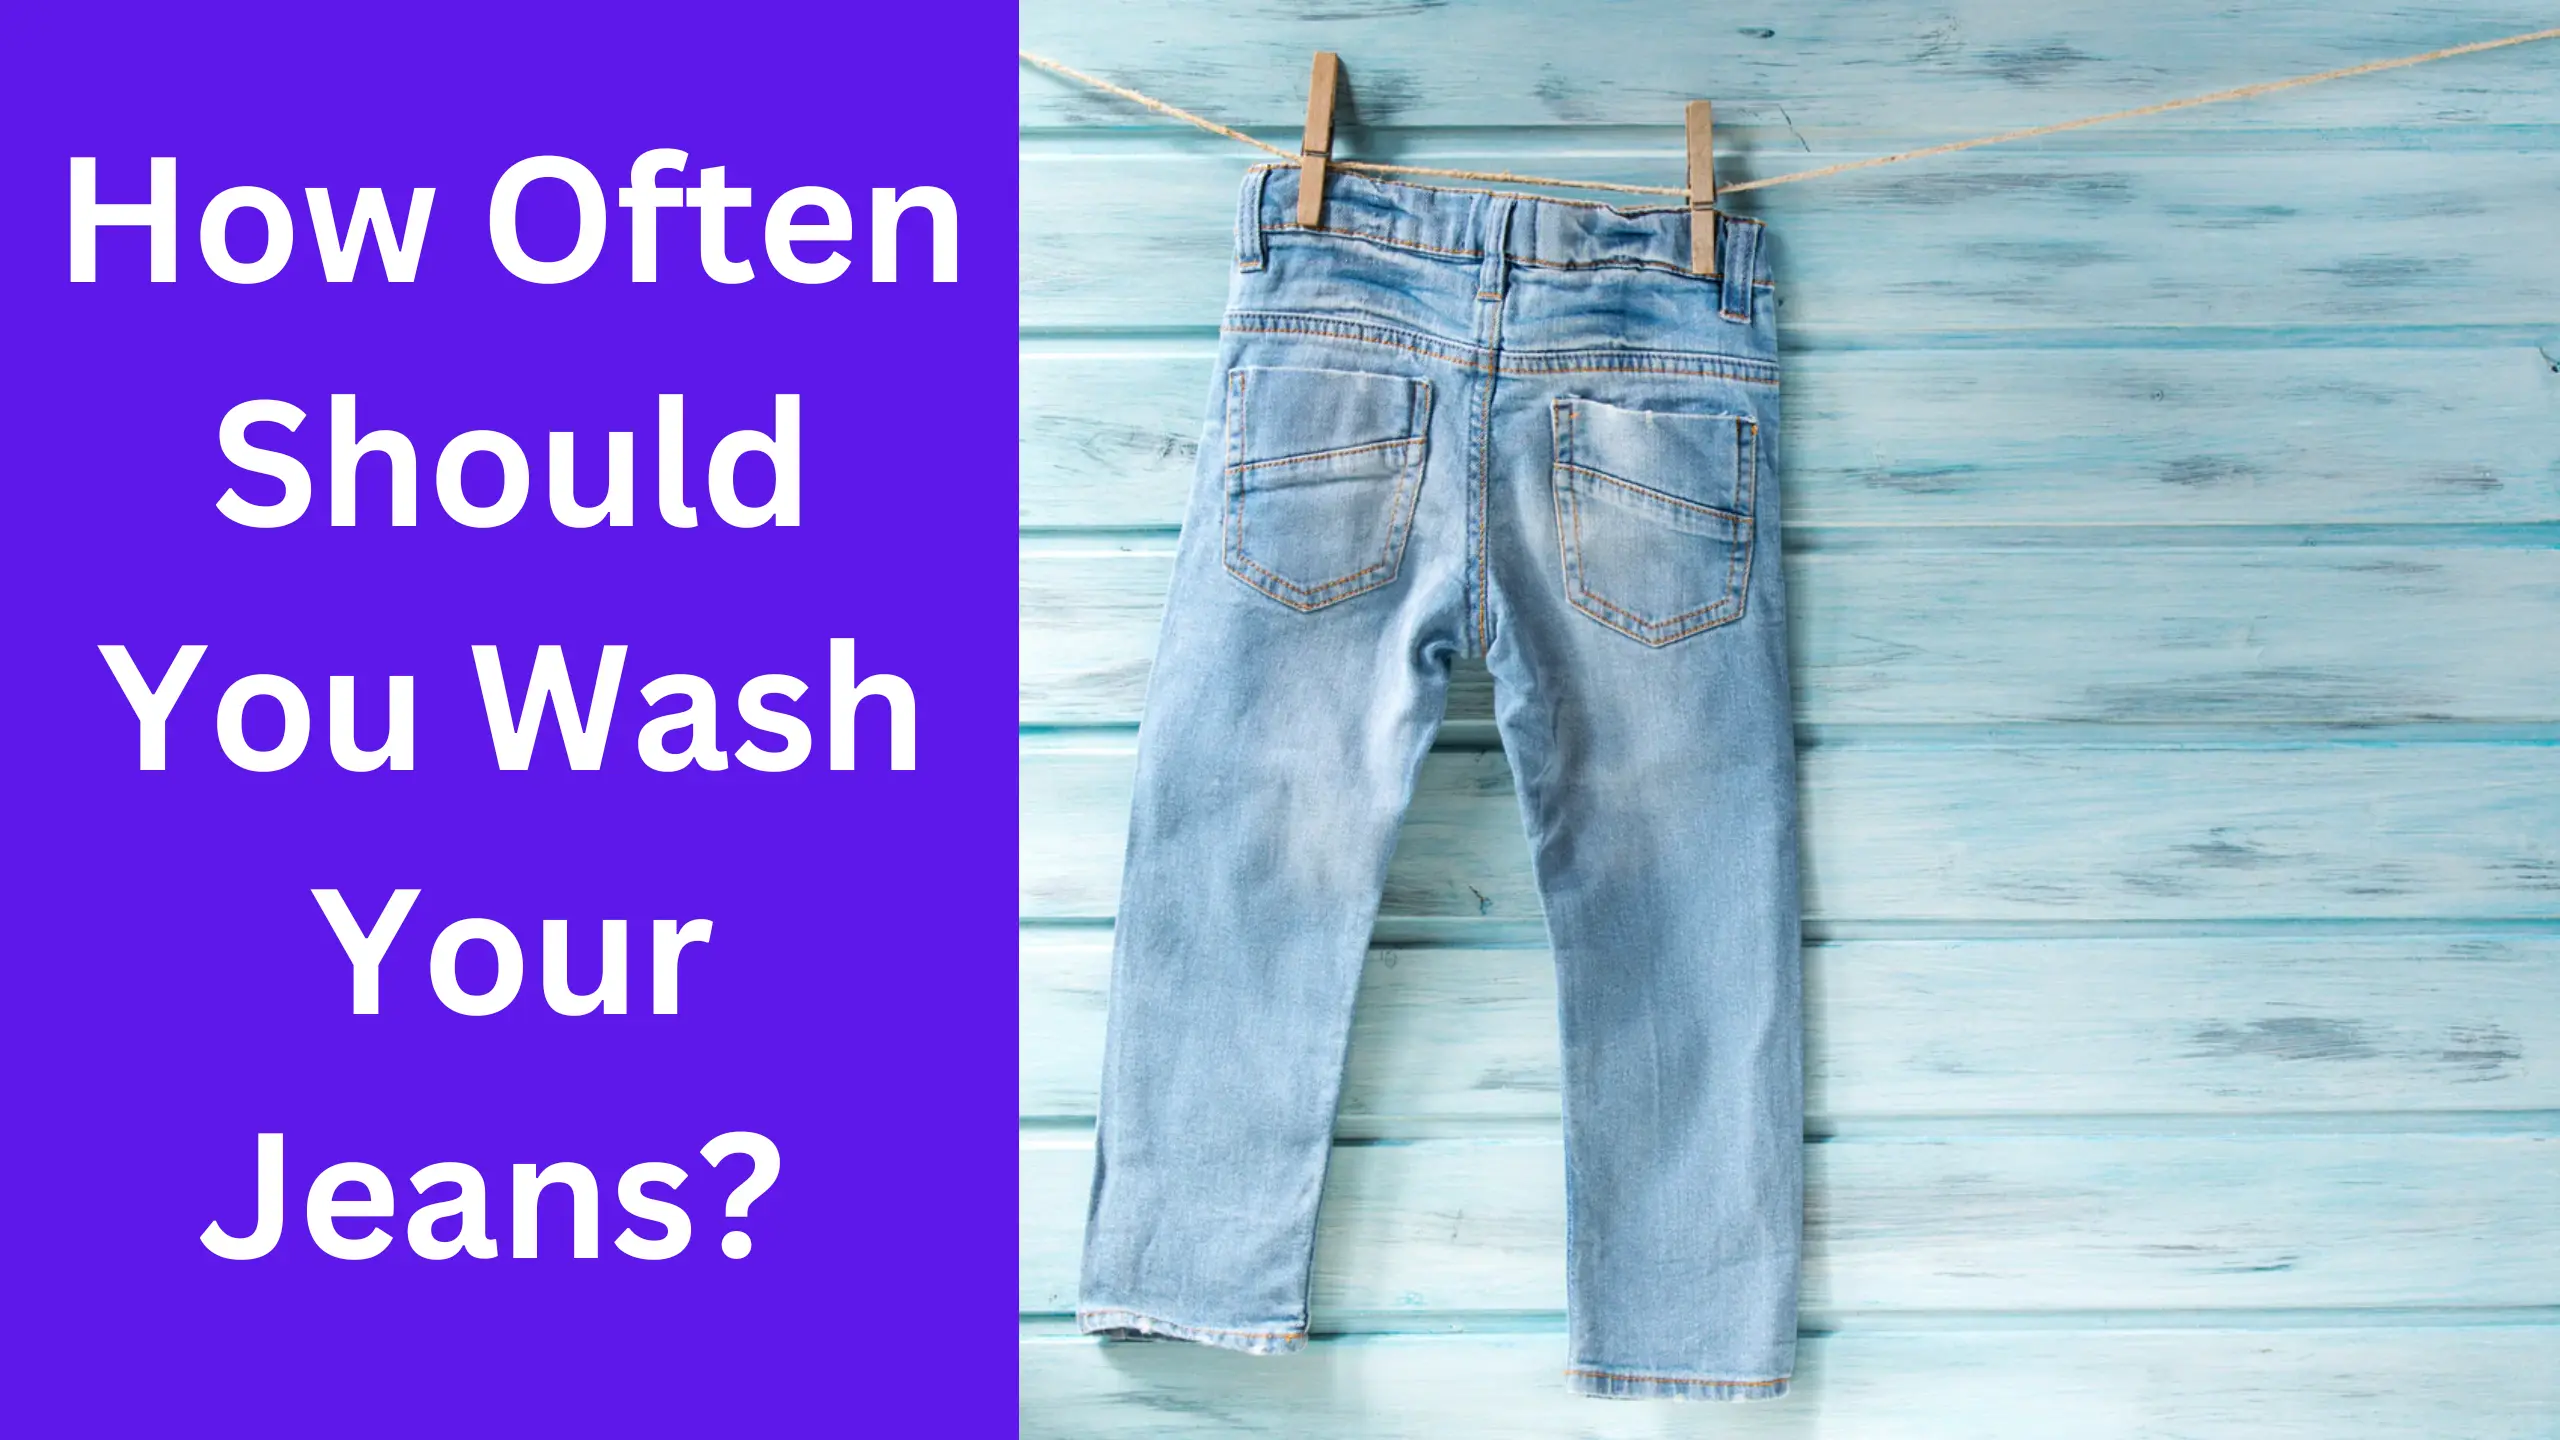 How Often Should You Wash Your Jeans? 